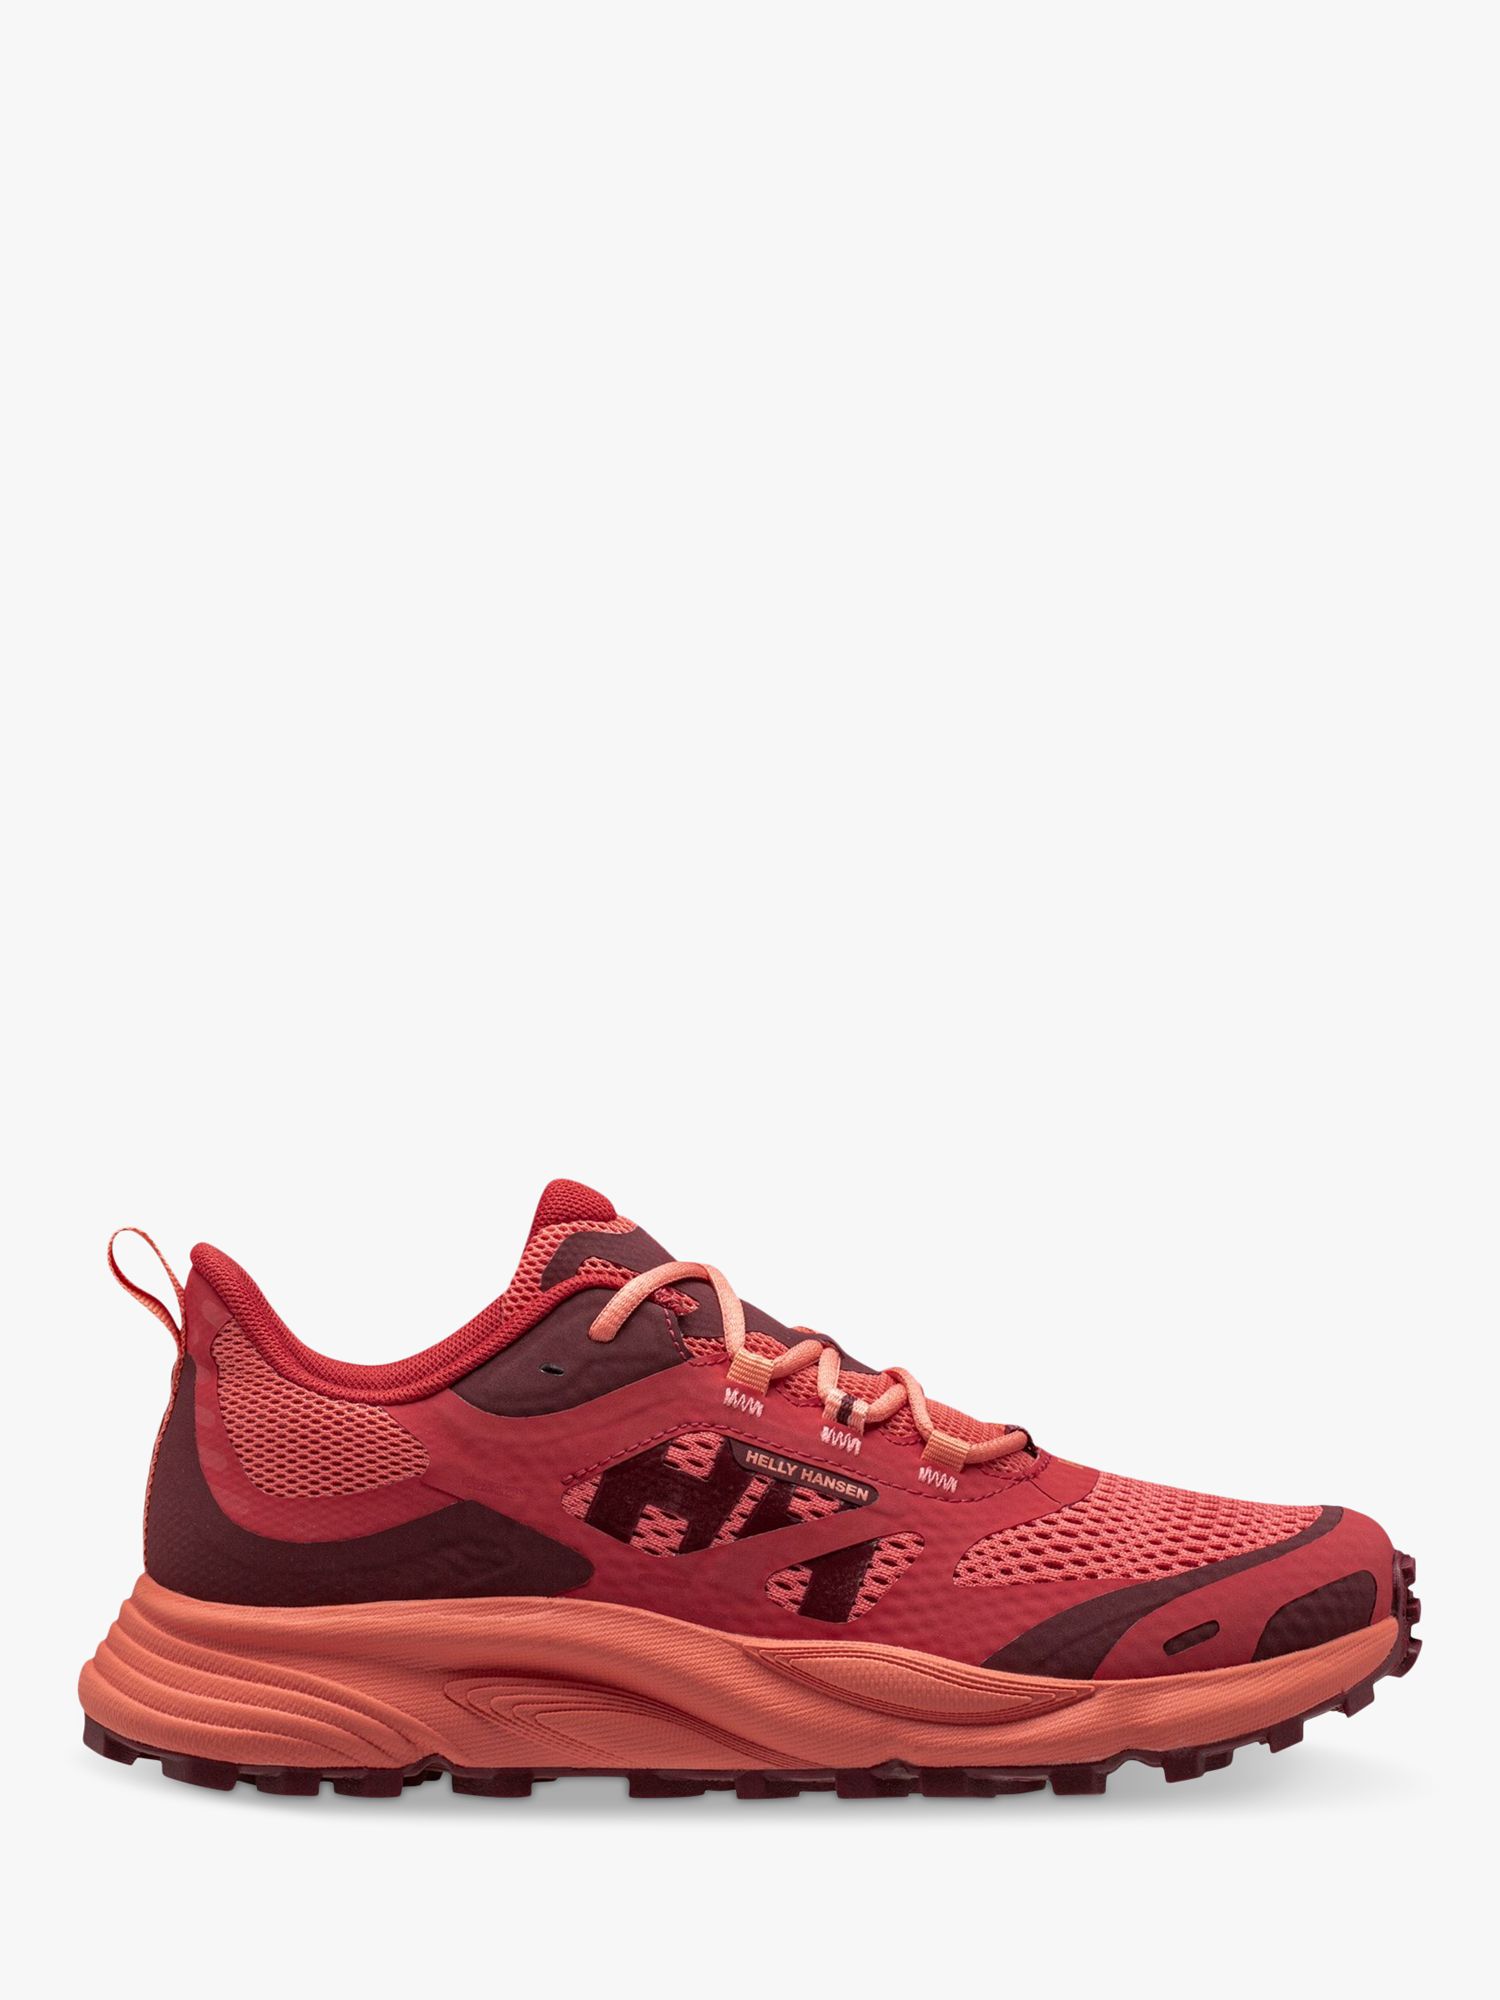 Helly Hansen Trail Wizard Running Shoes, Red at John Lewis & Partners